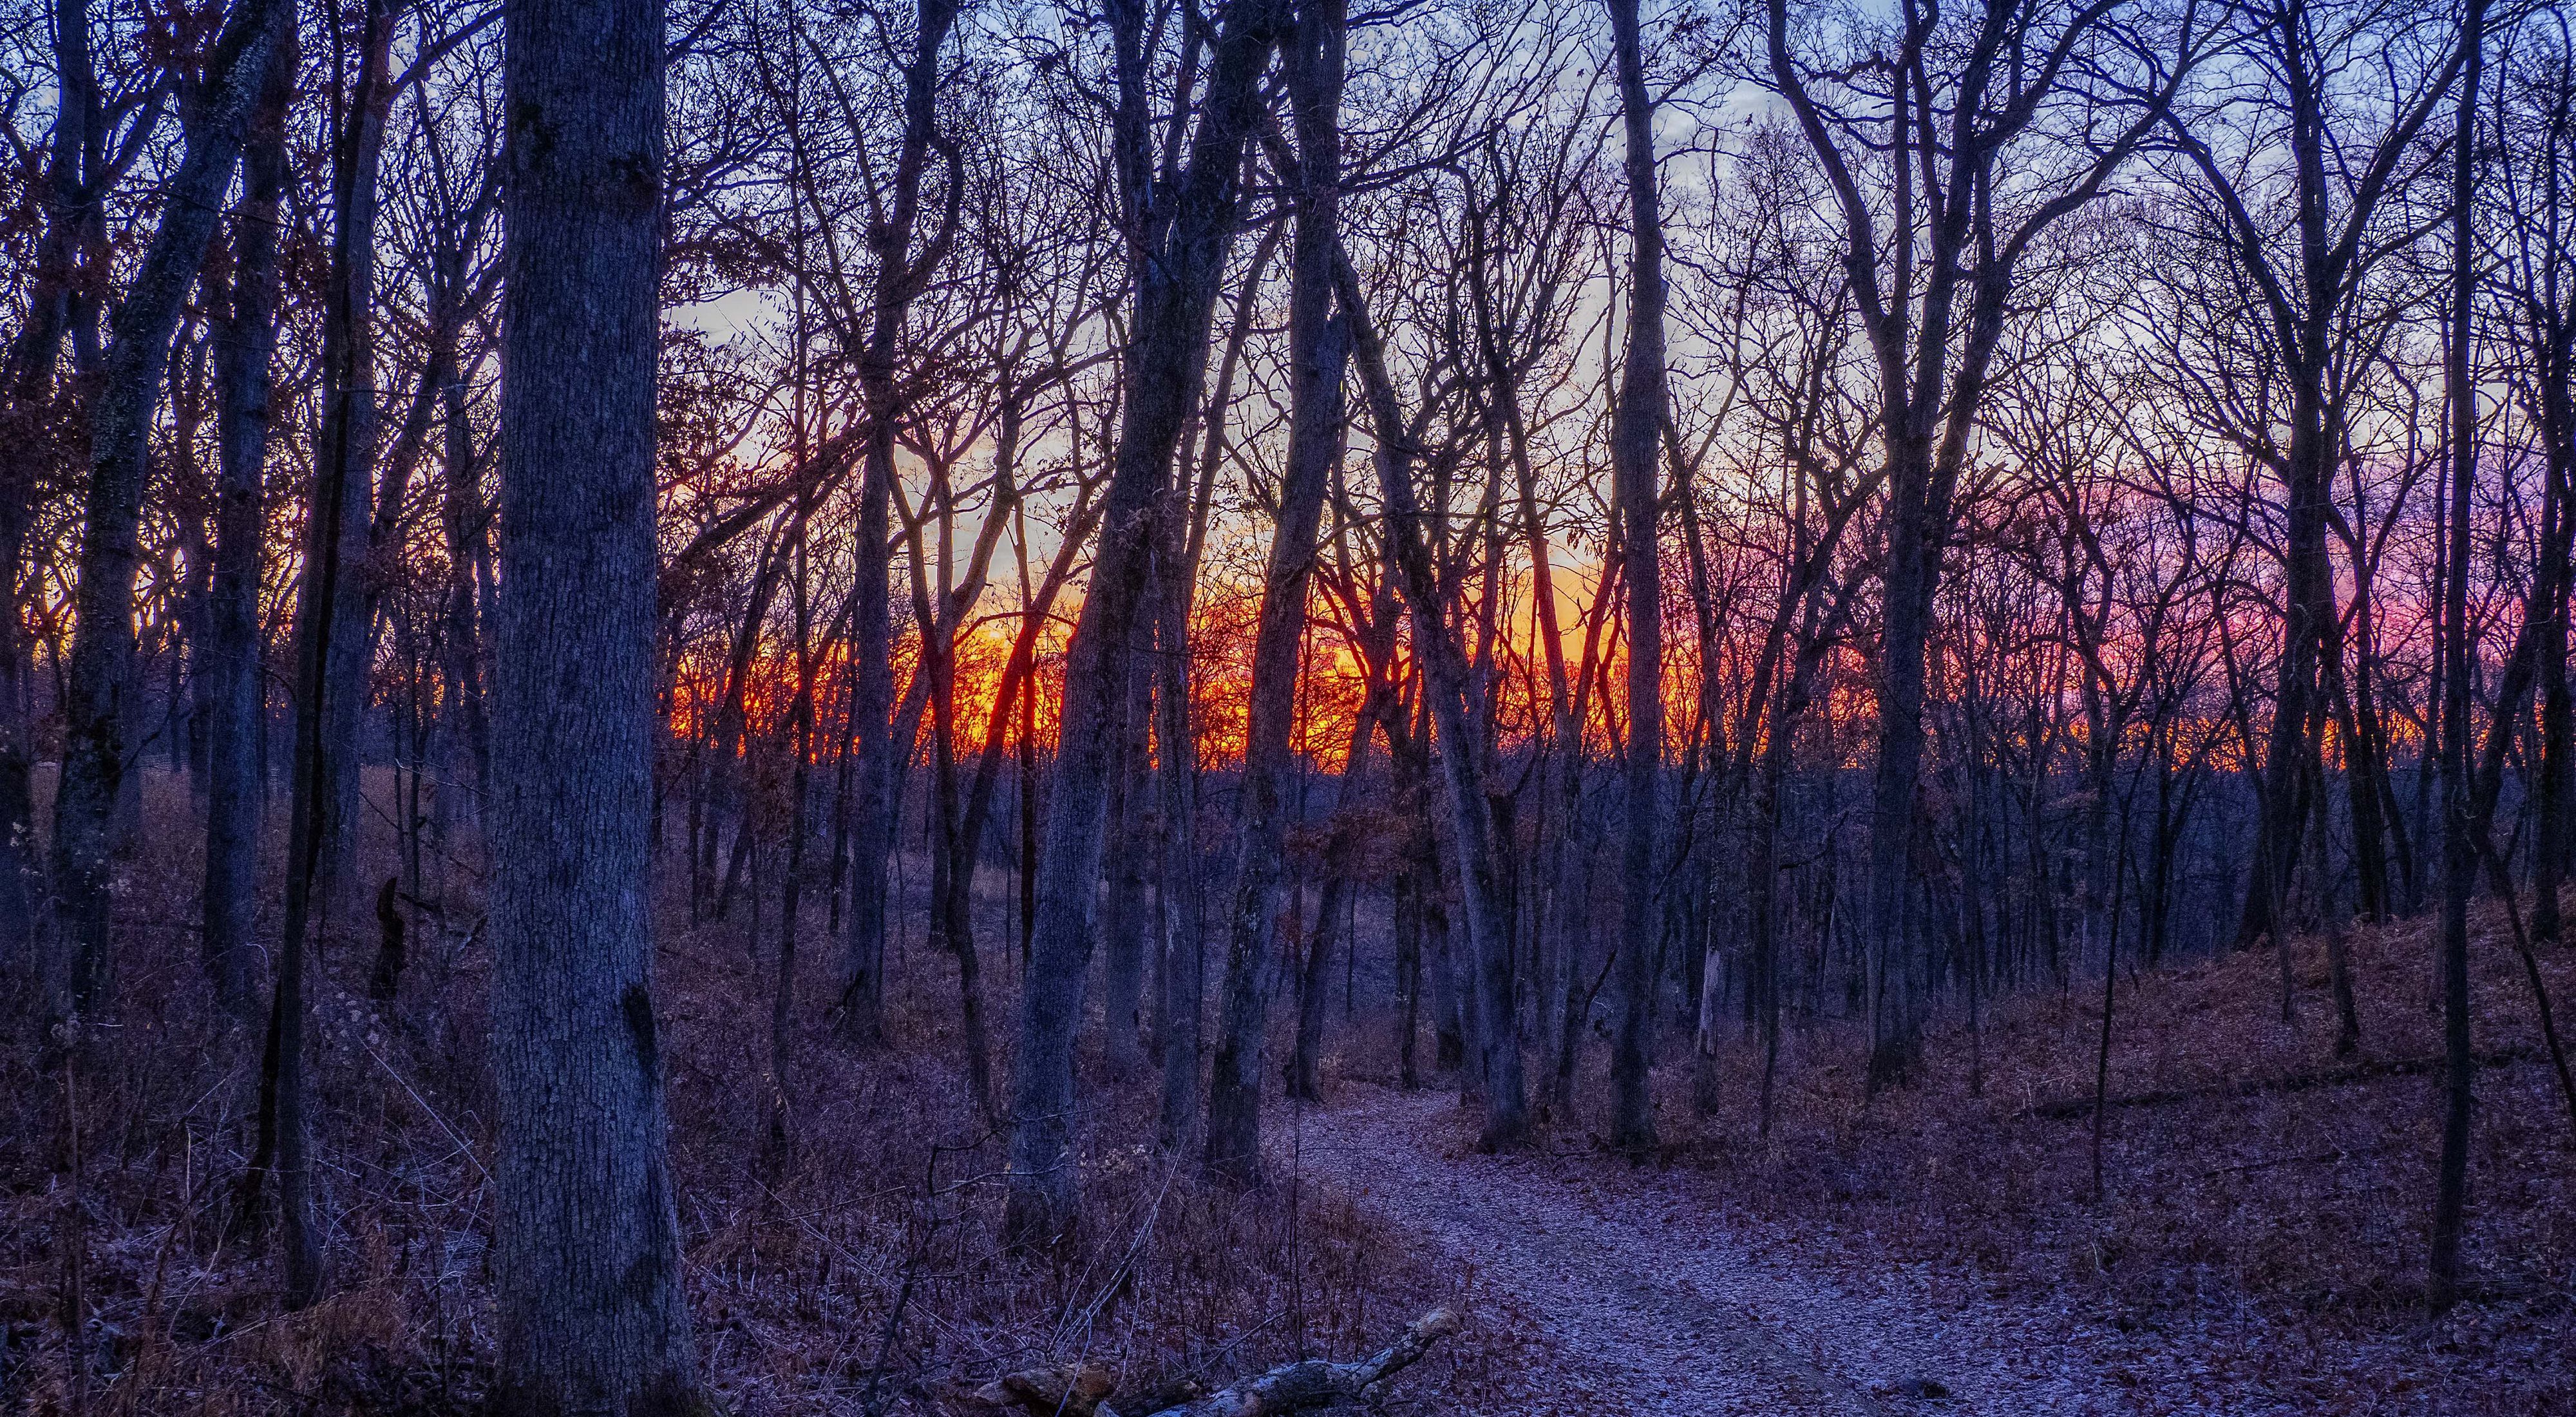 A sunrise amongst bare trees in a winter landscape in Illinois.